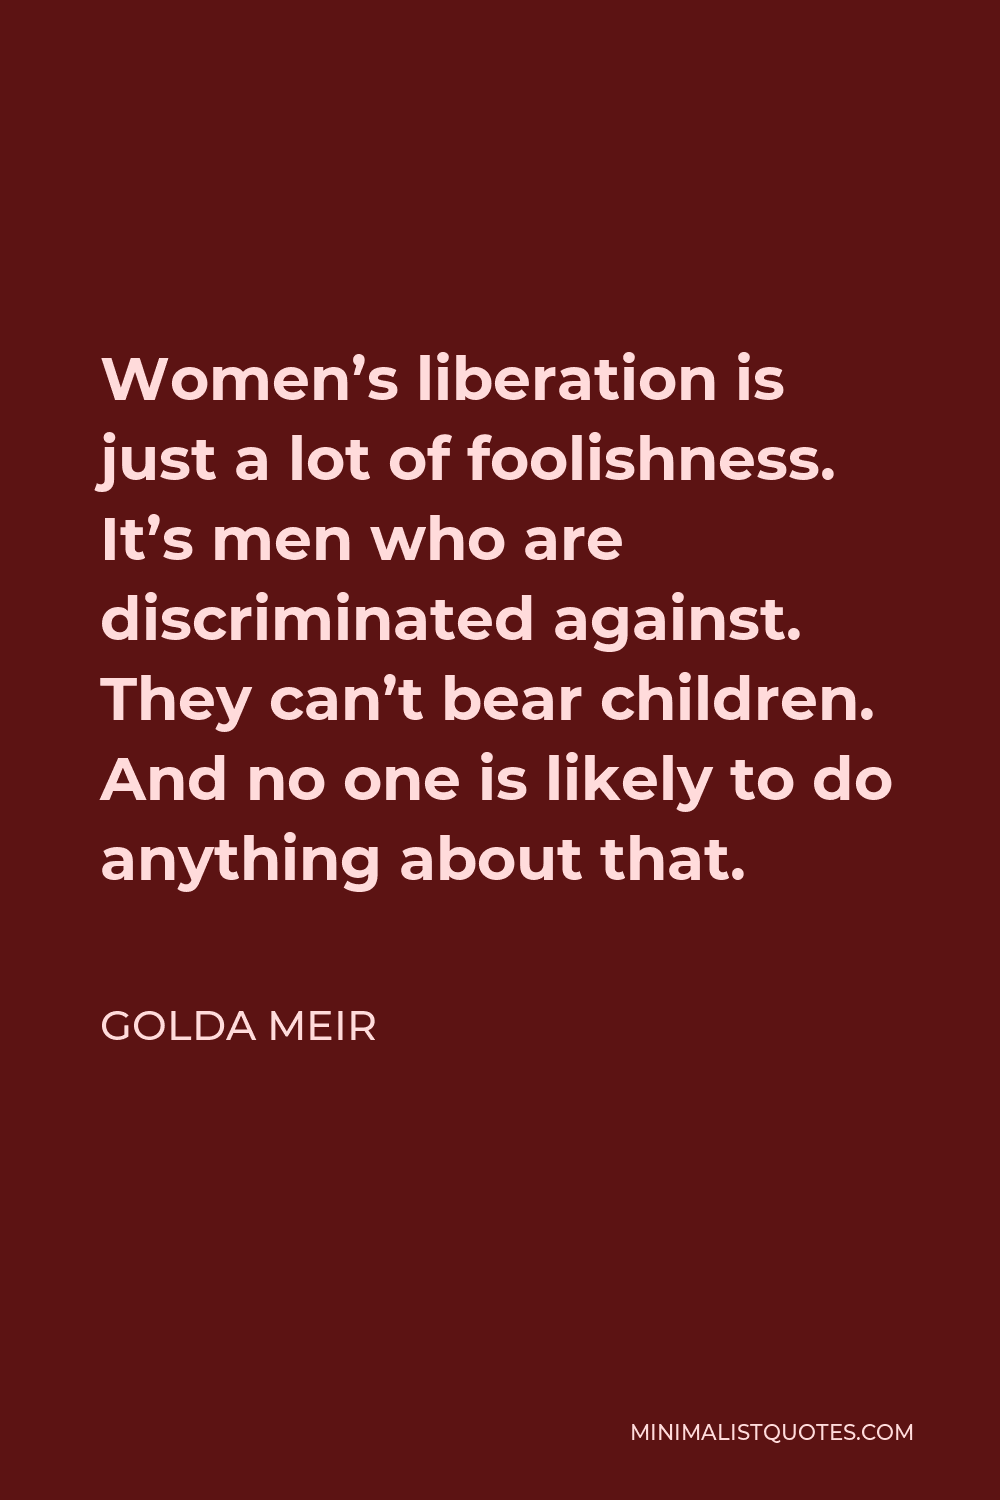 Golda Meir Quote - Women’s liberation is just a lot of foolishness. It’s men who are discriminated against. They can’t bear children. And no one is likely to do anything about that.